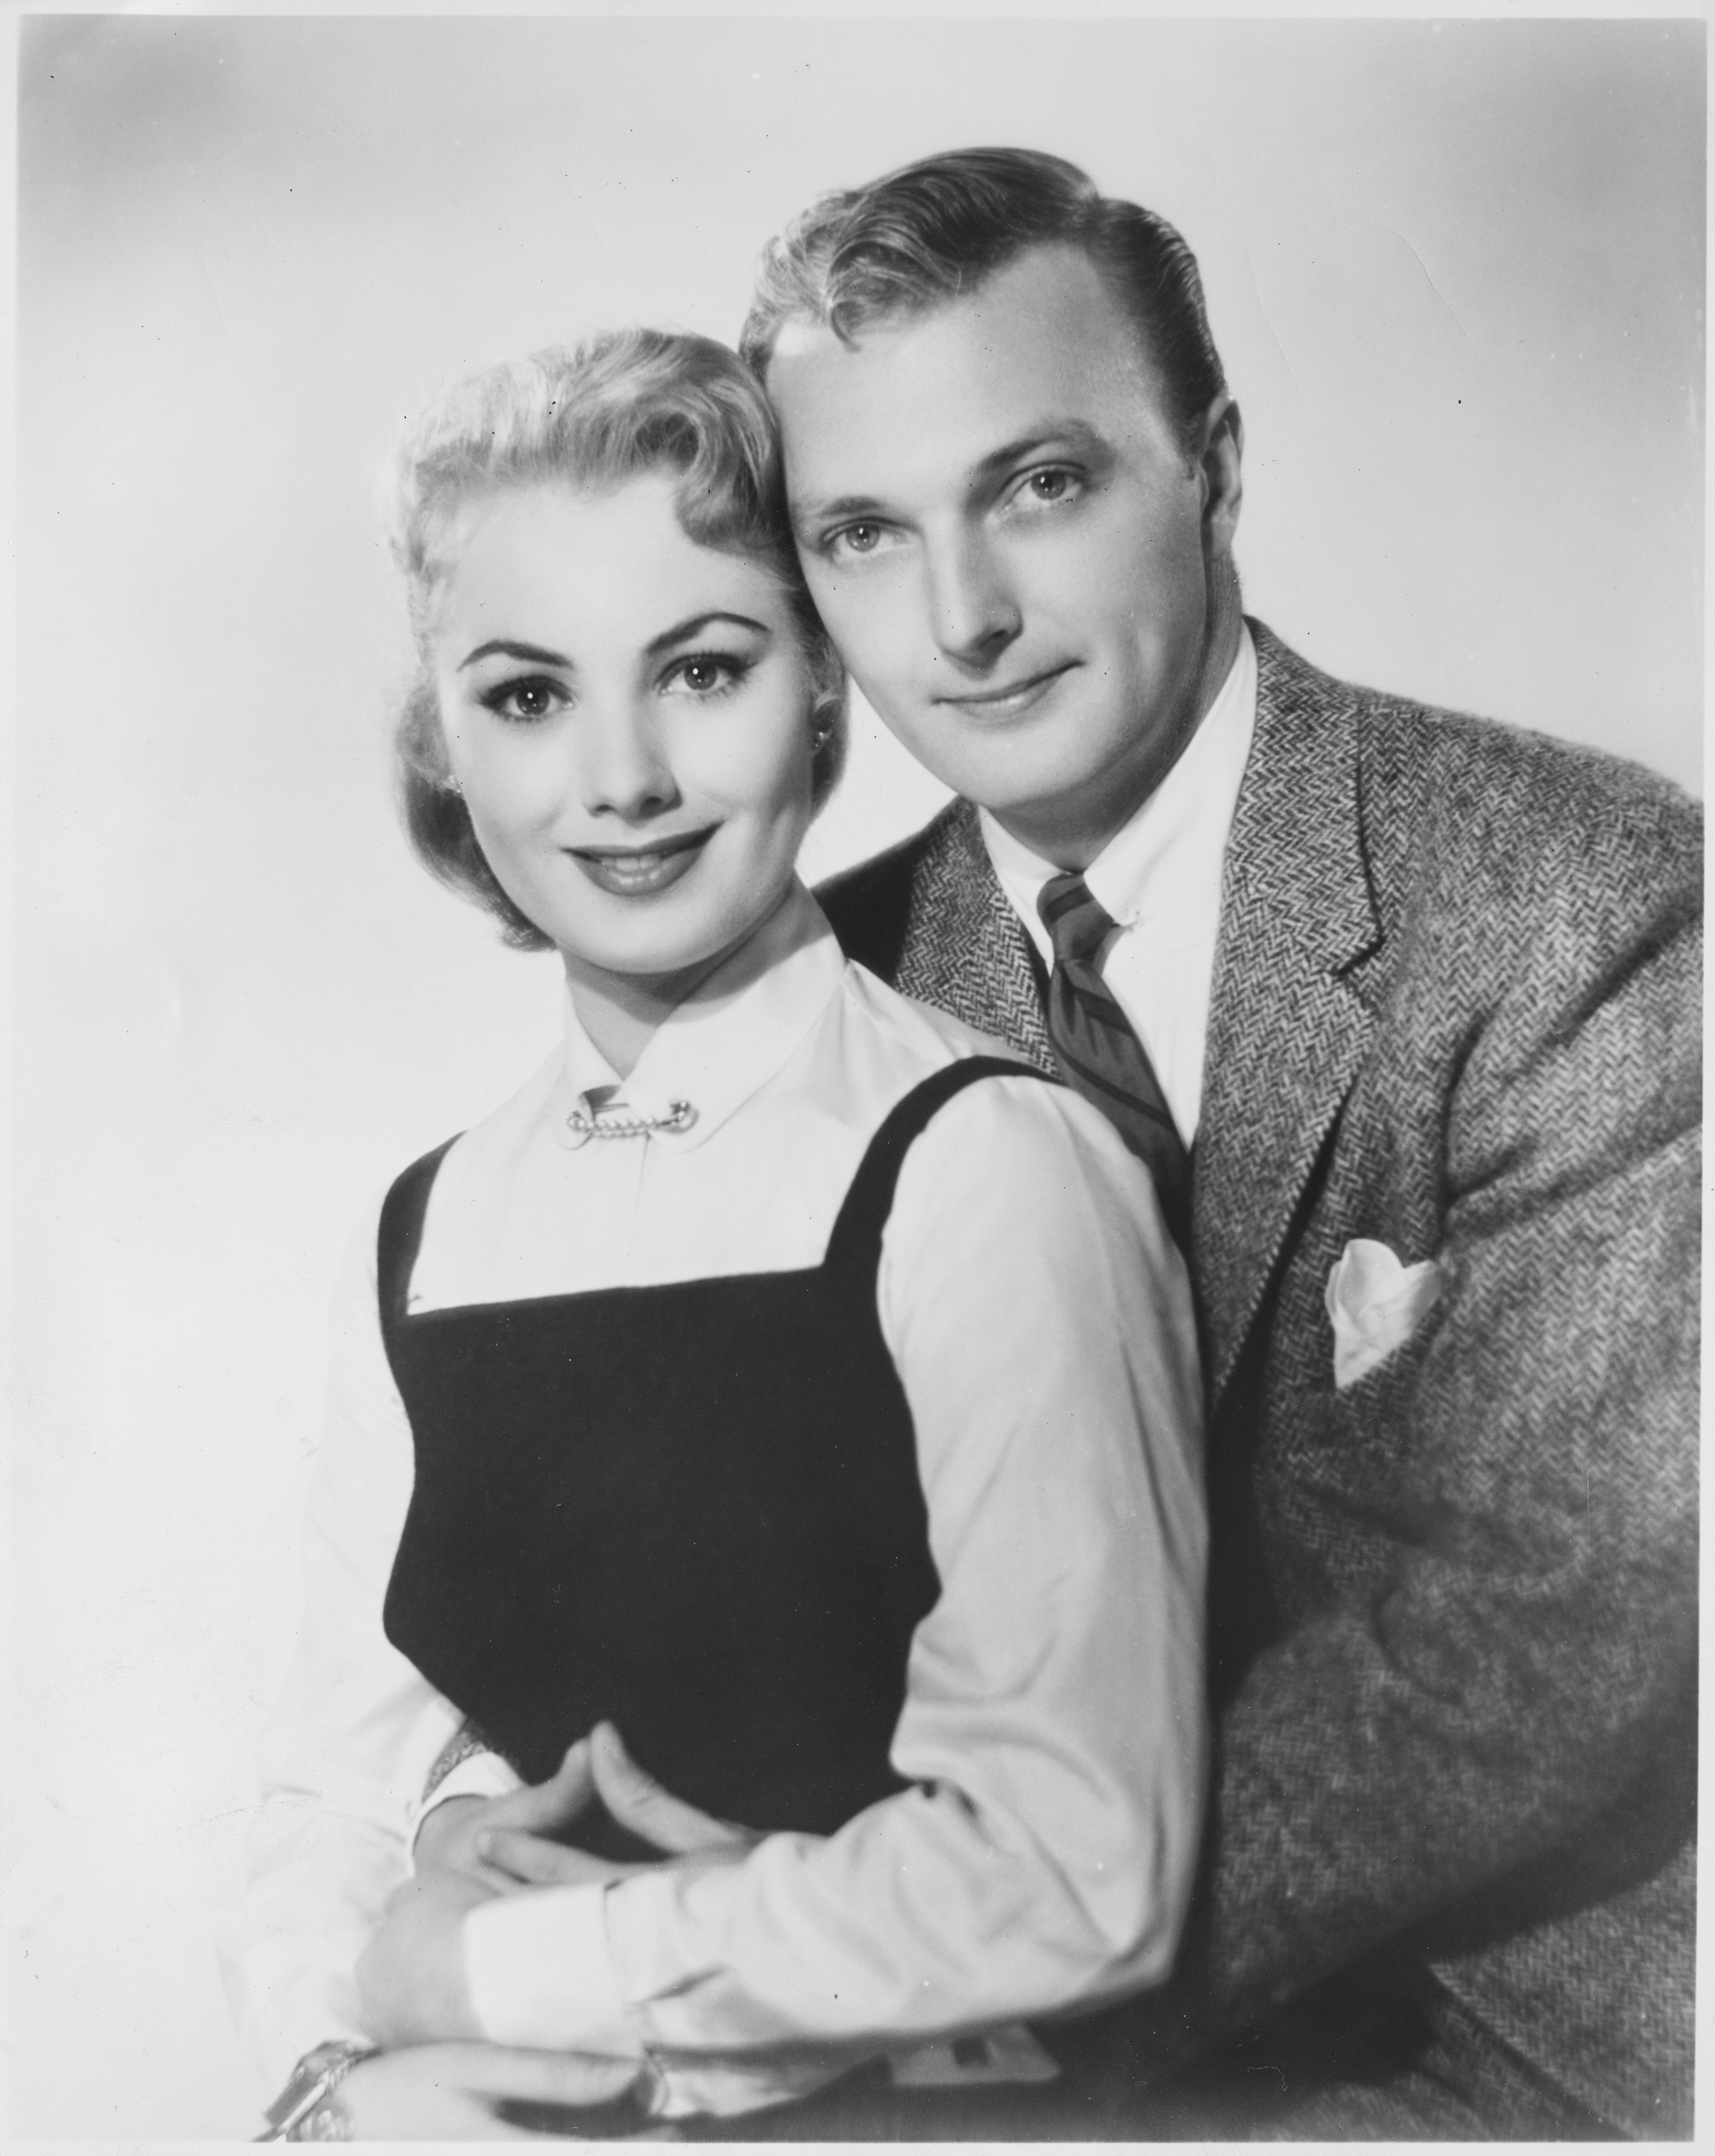 Actors Shirley Jones and Jack Cassidy, circa 1950s | Source: Getty Images